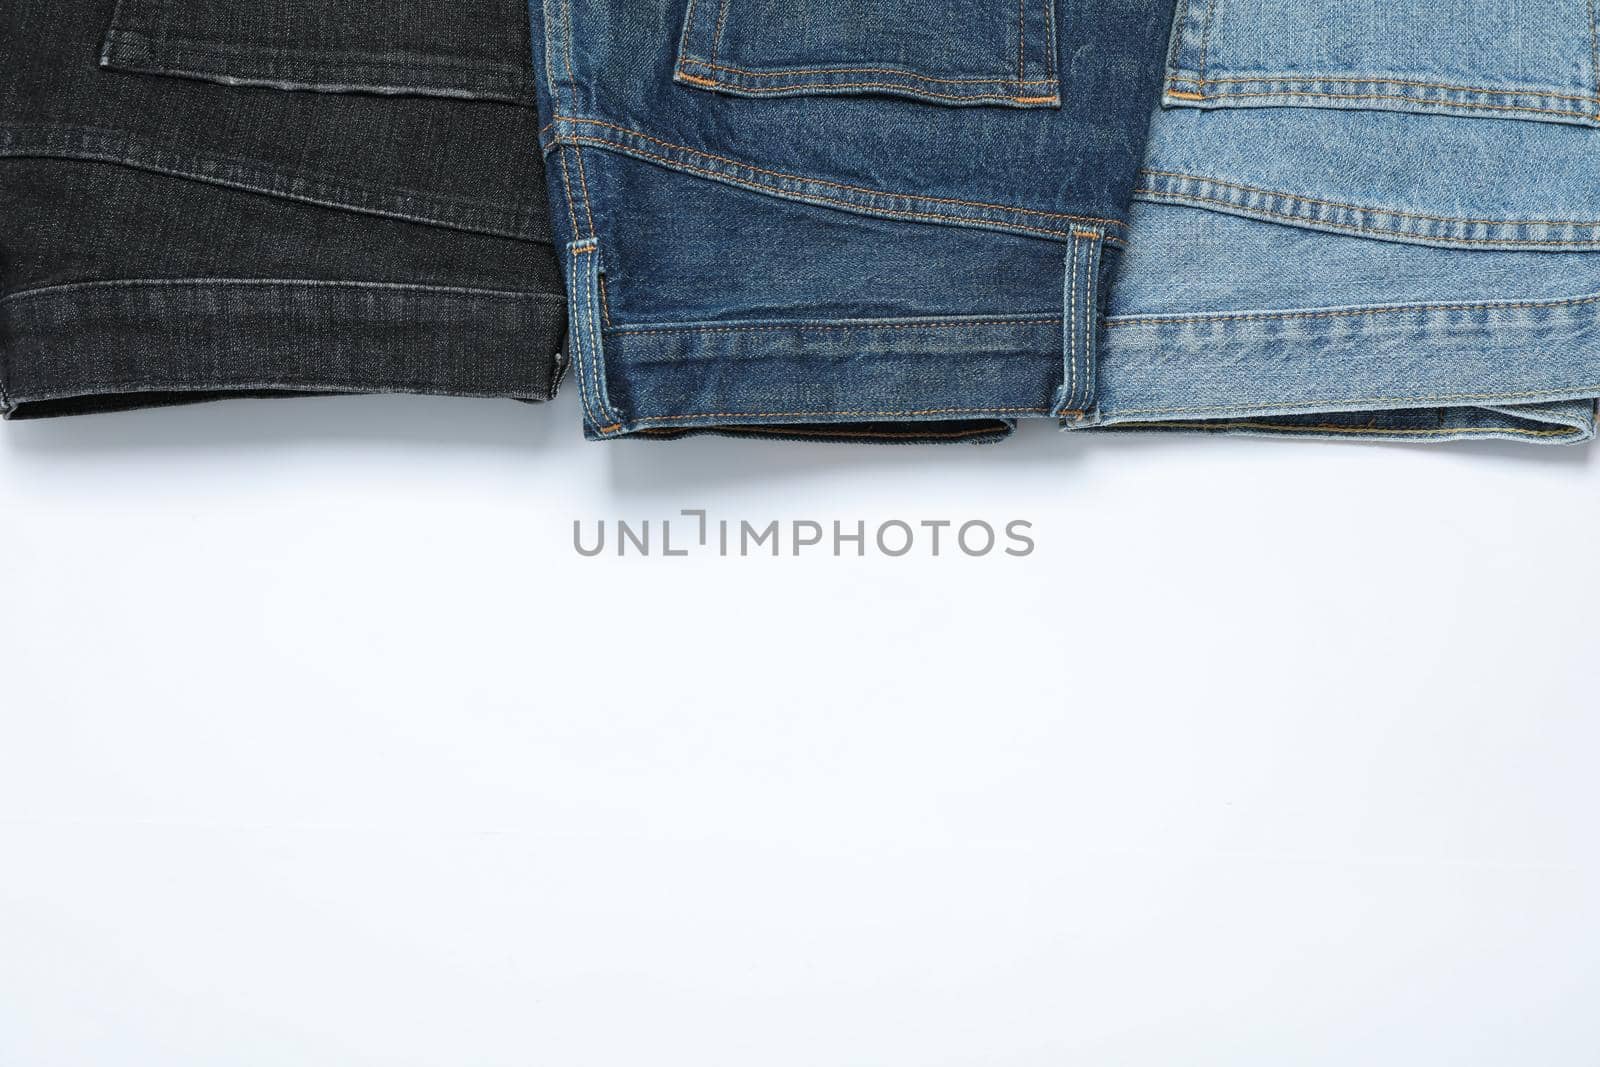 Flat lay with jeans on white background, copy space